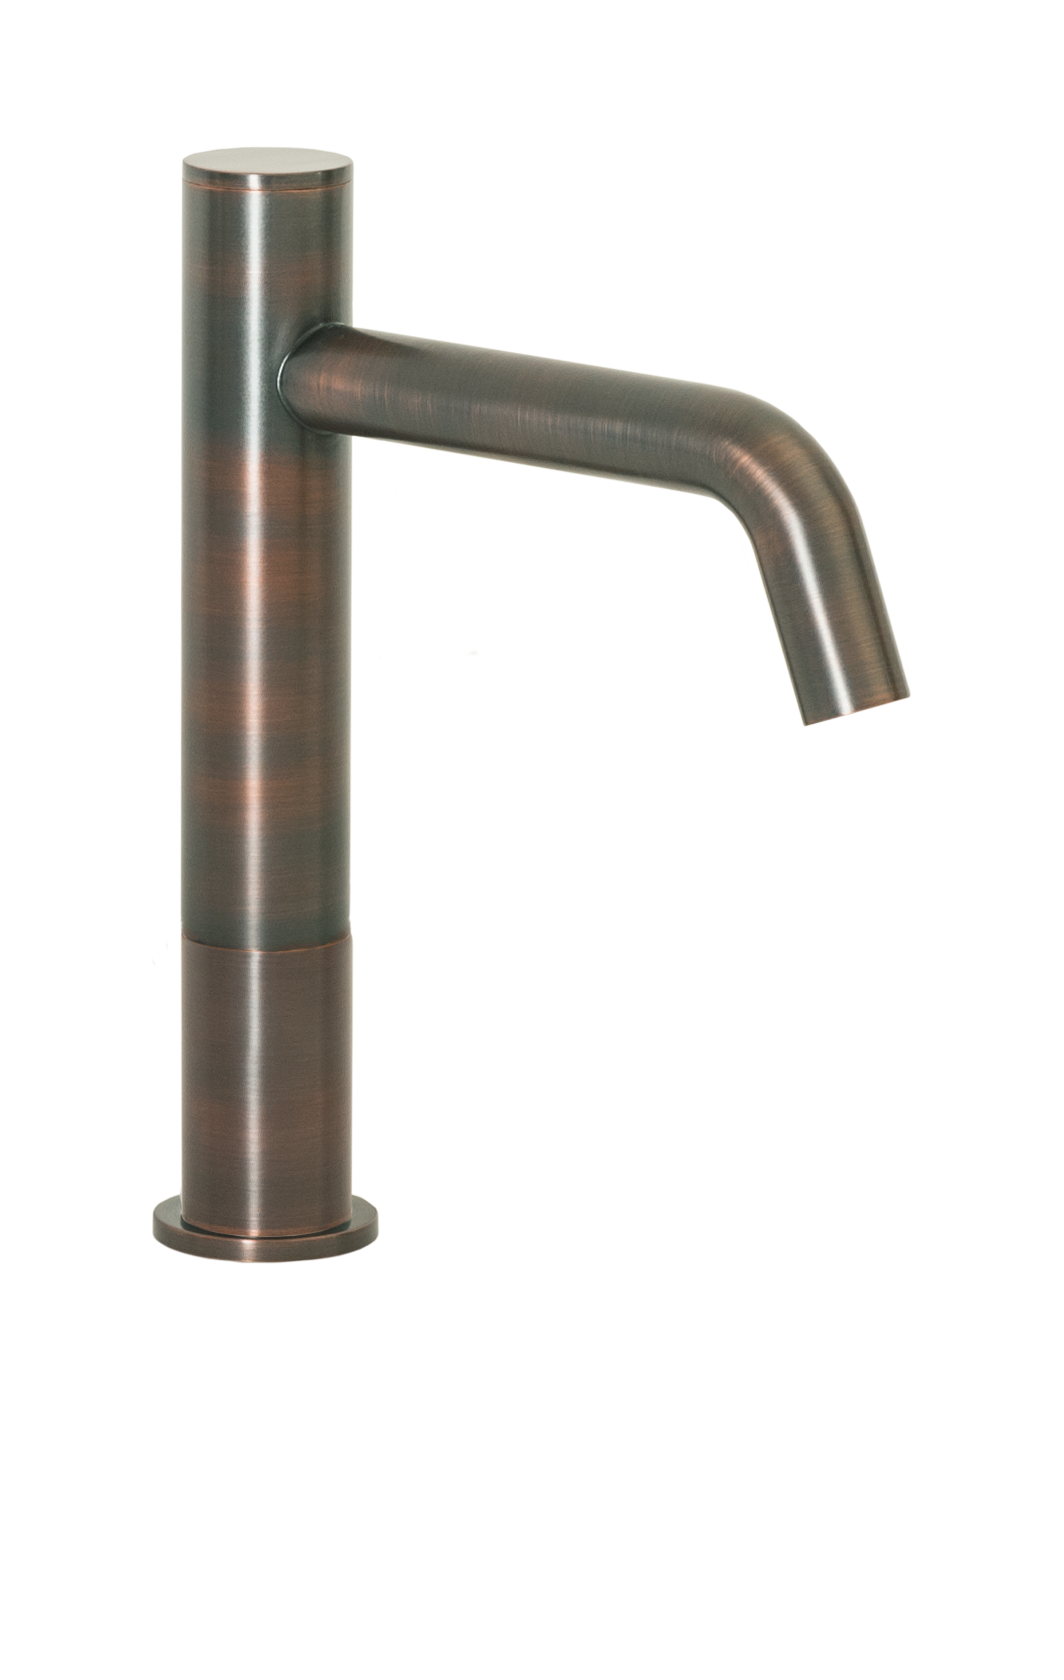 FA-3283 Automatic Faucet with 8” Spout Reach and 3” Riser In Venetian Bronze